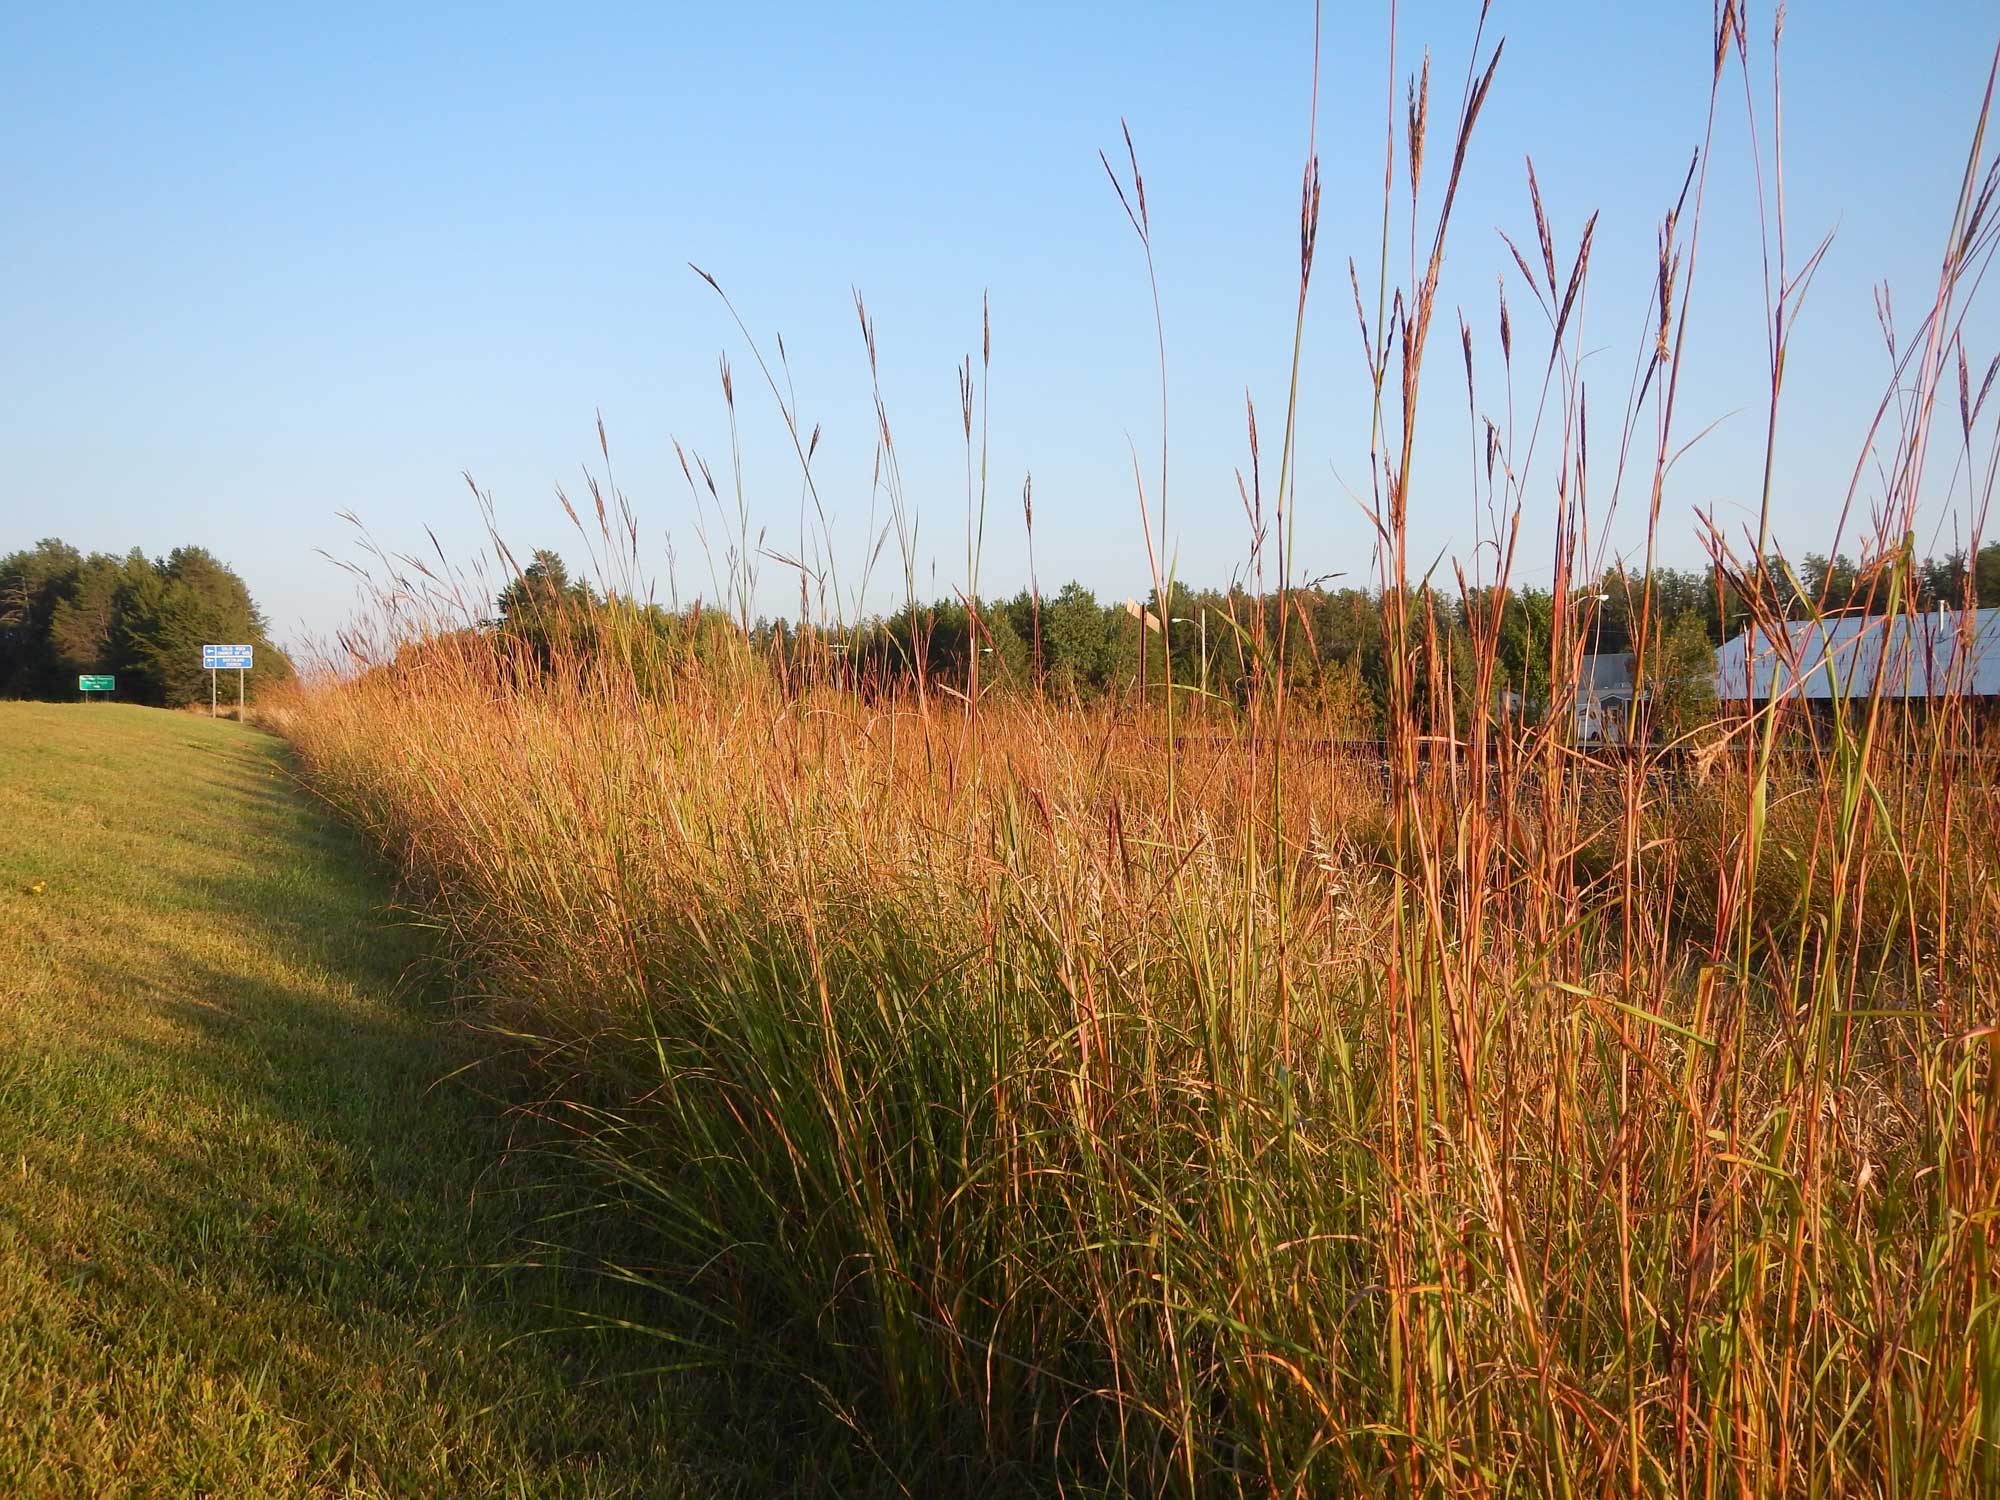 Photograph of big bluestem growing near a roadside in Minnesota, U.S.A. The photo shows tall, reddish grass plants with inflorescences on long stalks growing in a line extending from the right foreground to the middle-left horizon, with mowed lawn to the left. Two roadsigns and trees can be seen near the horizon, with a building on on the right.